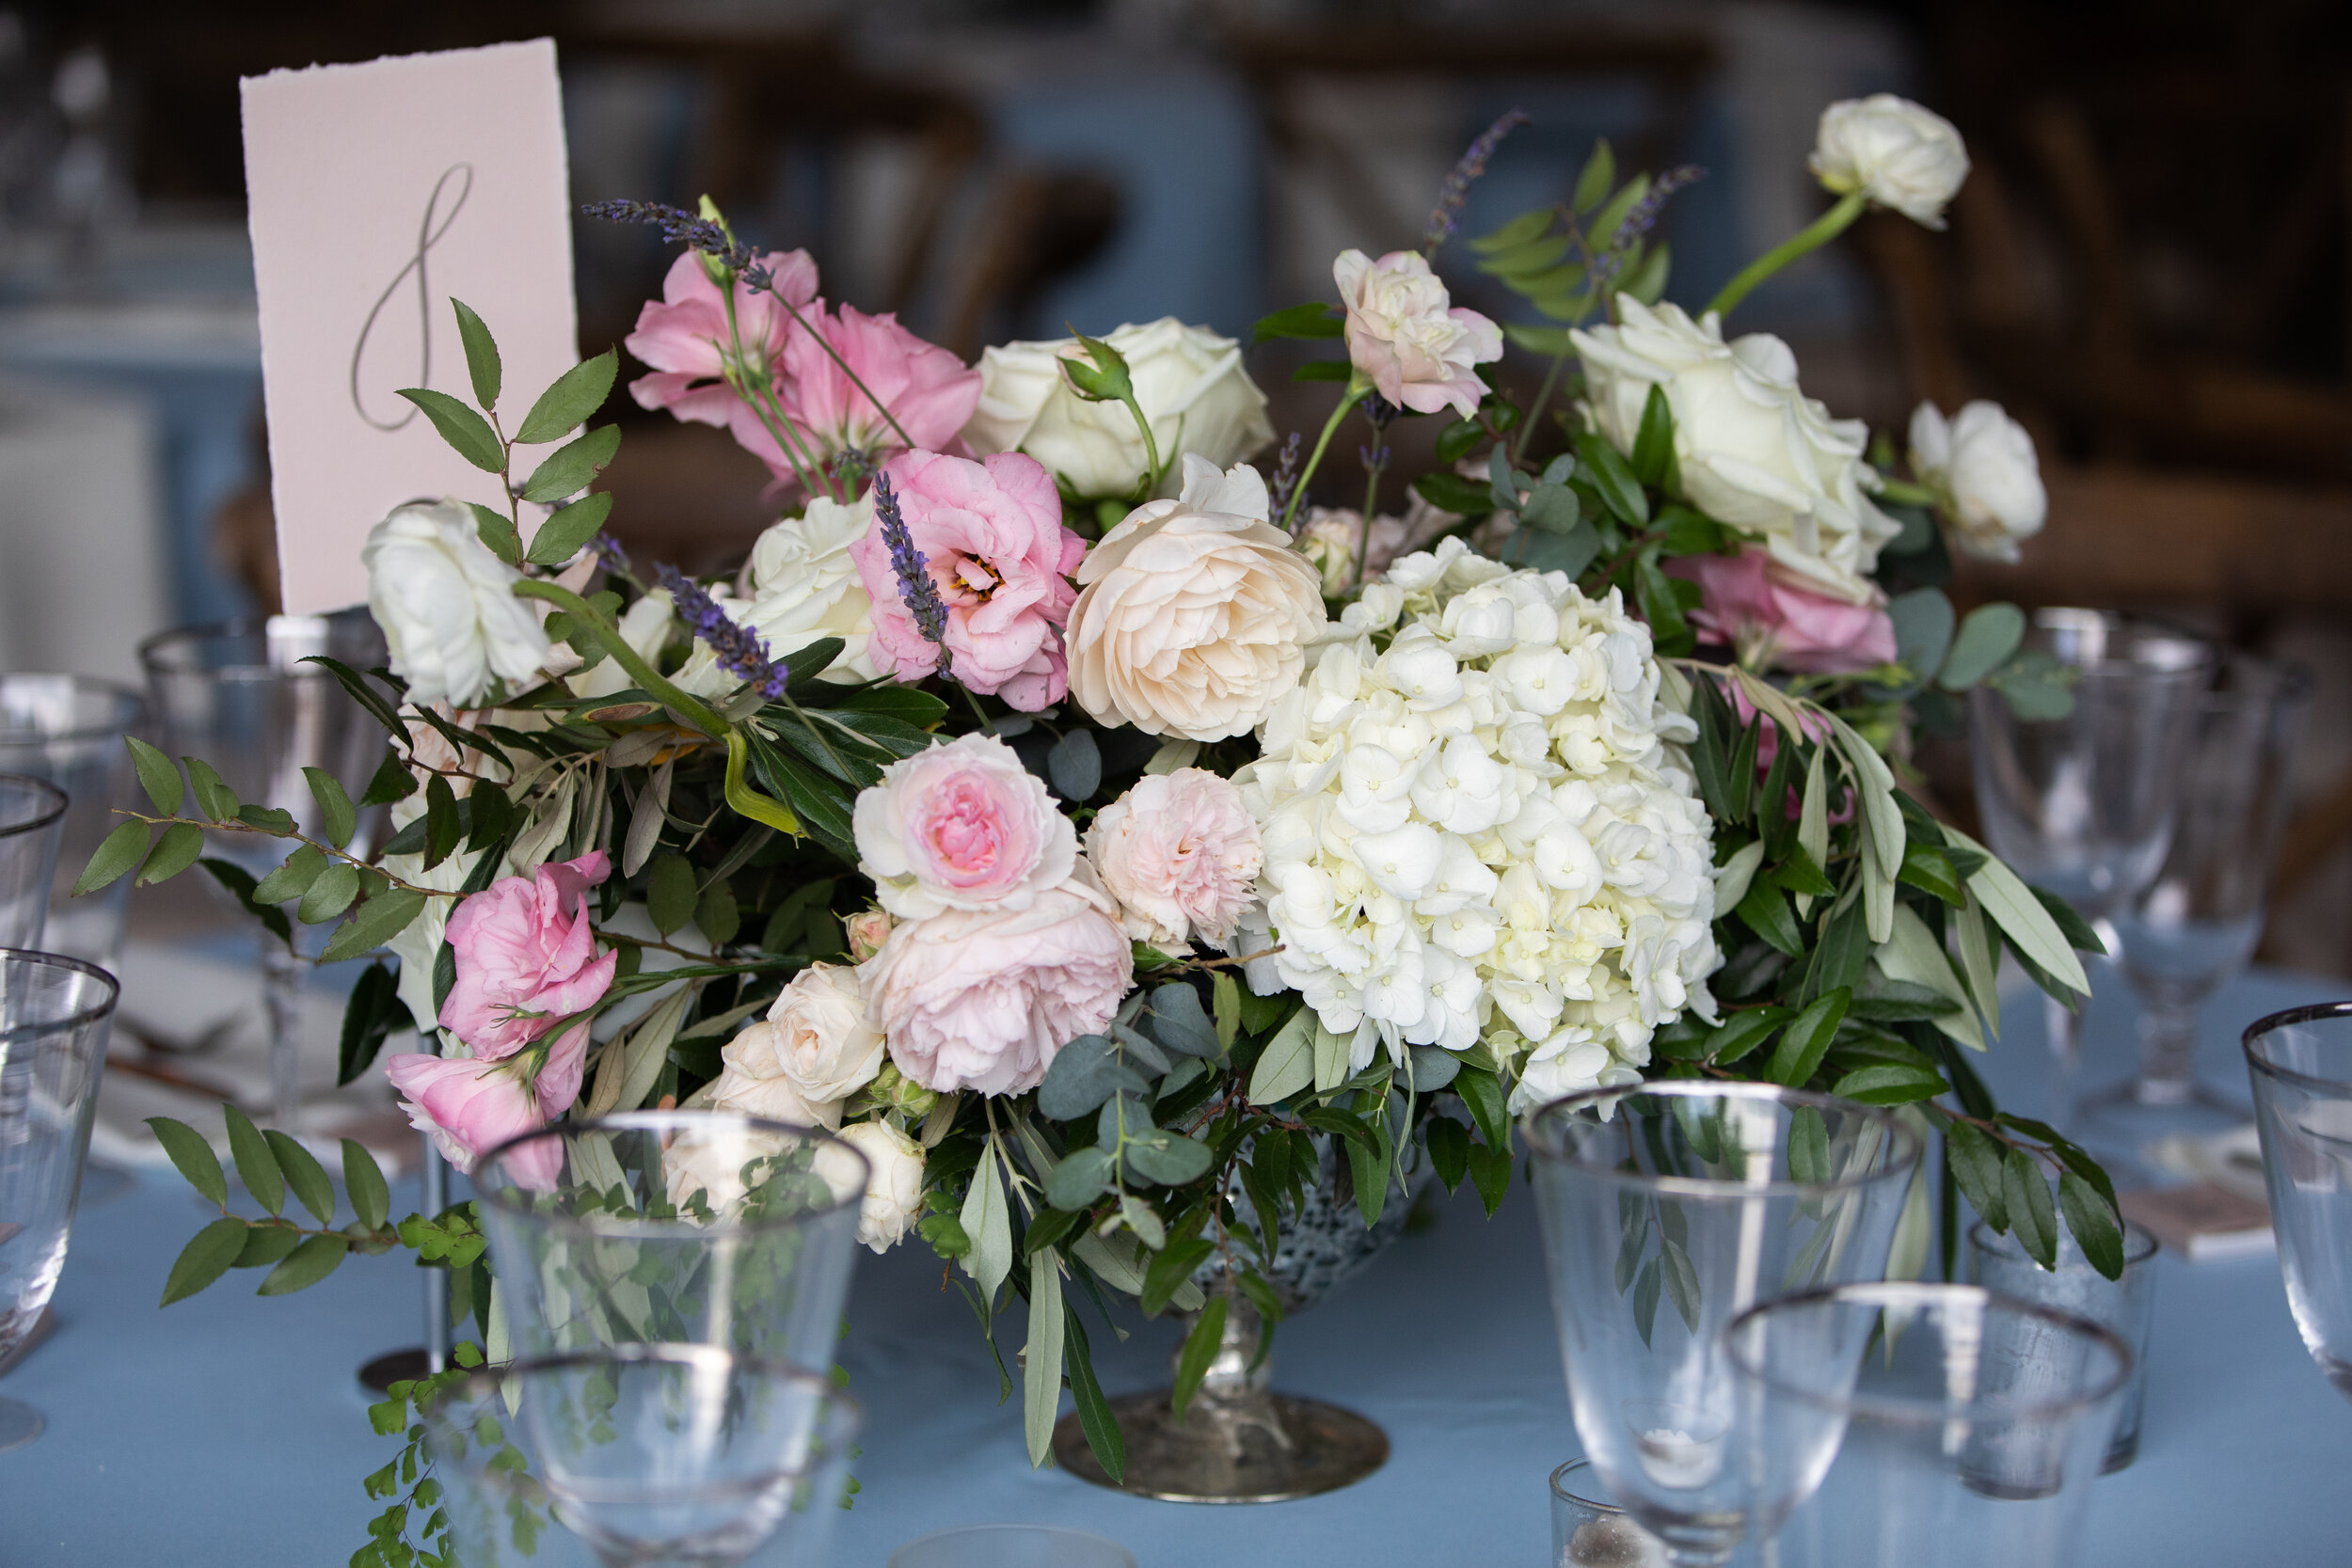 Low floral blush, ivory, and neutral centerpieces with hydrangeas, peonies, garden roses, ranunculus, ferns, and olives branches. Belle Meade Plantation wedding and event florist.